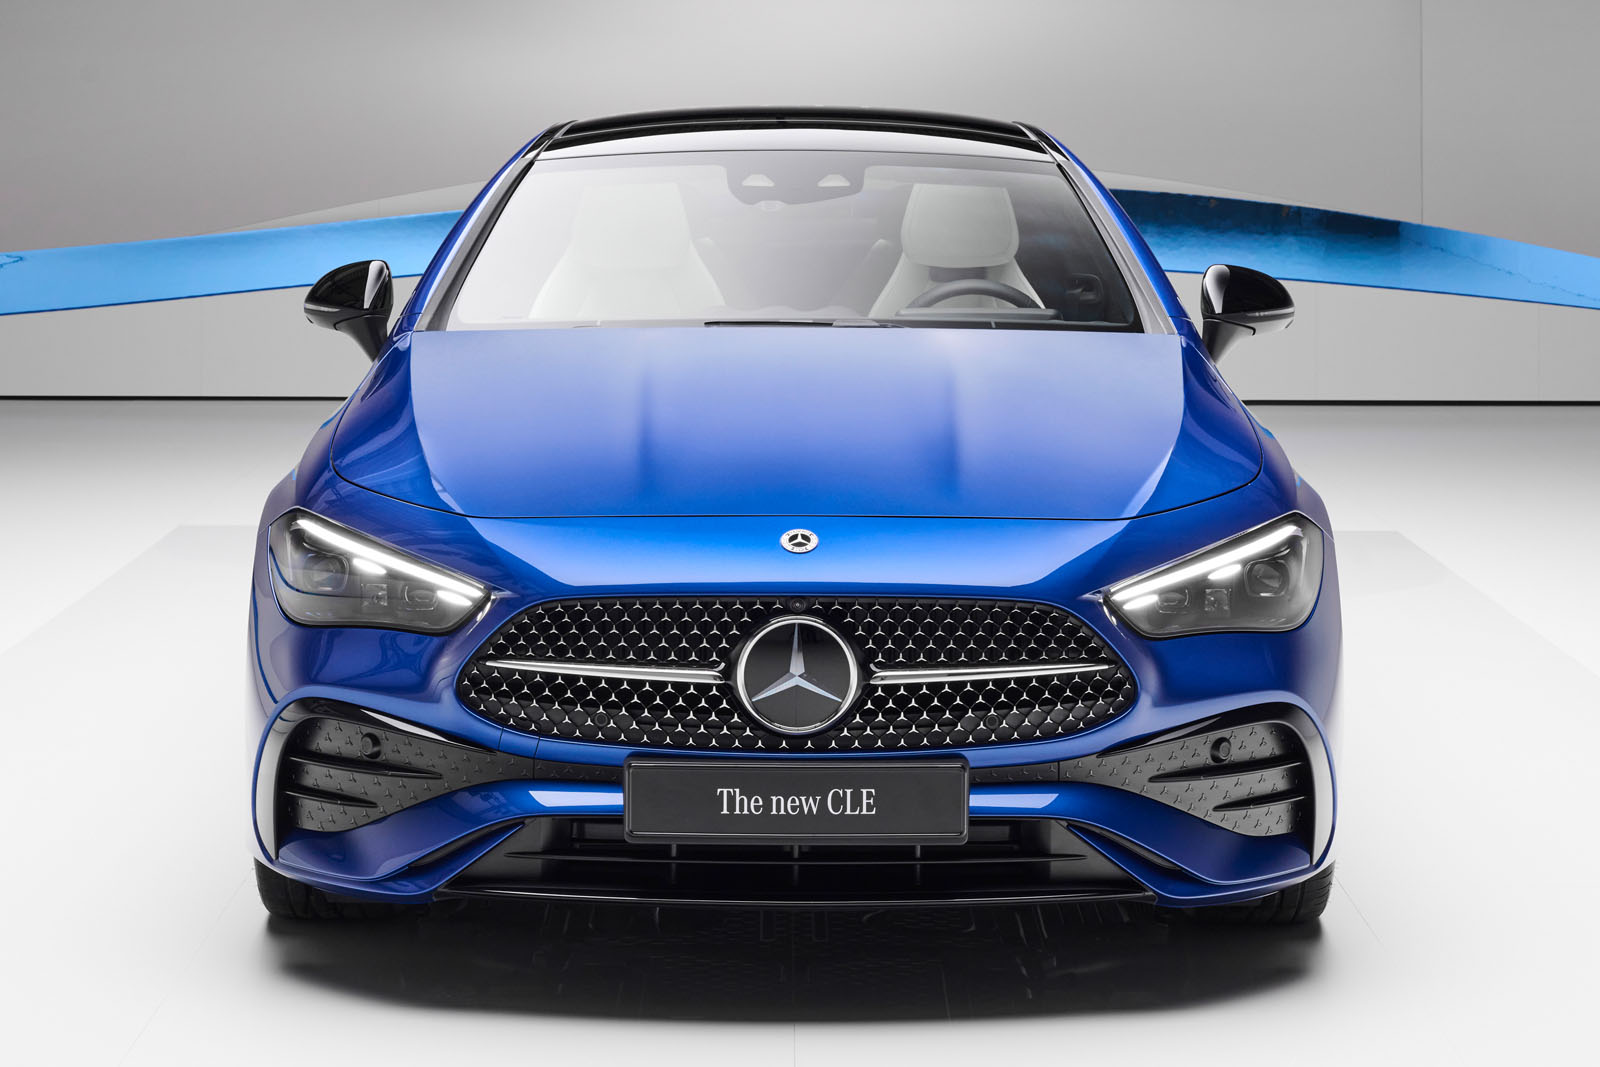 New 2024 Mercedes-Benz CLE Coupé priced from £46,605 in UK